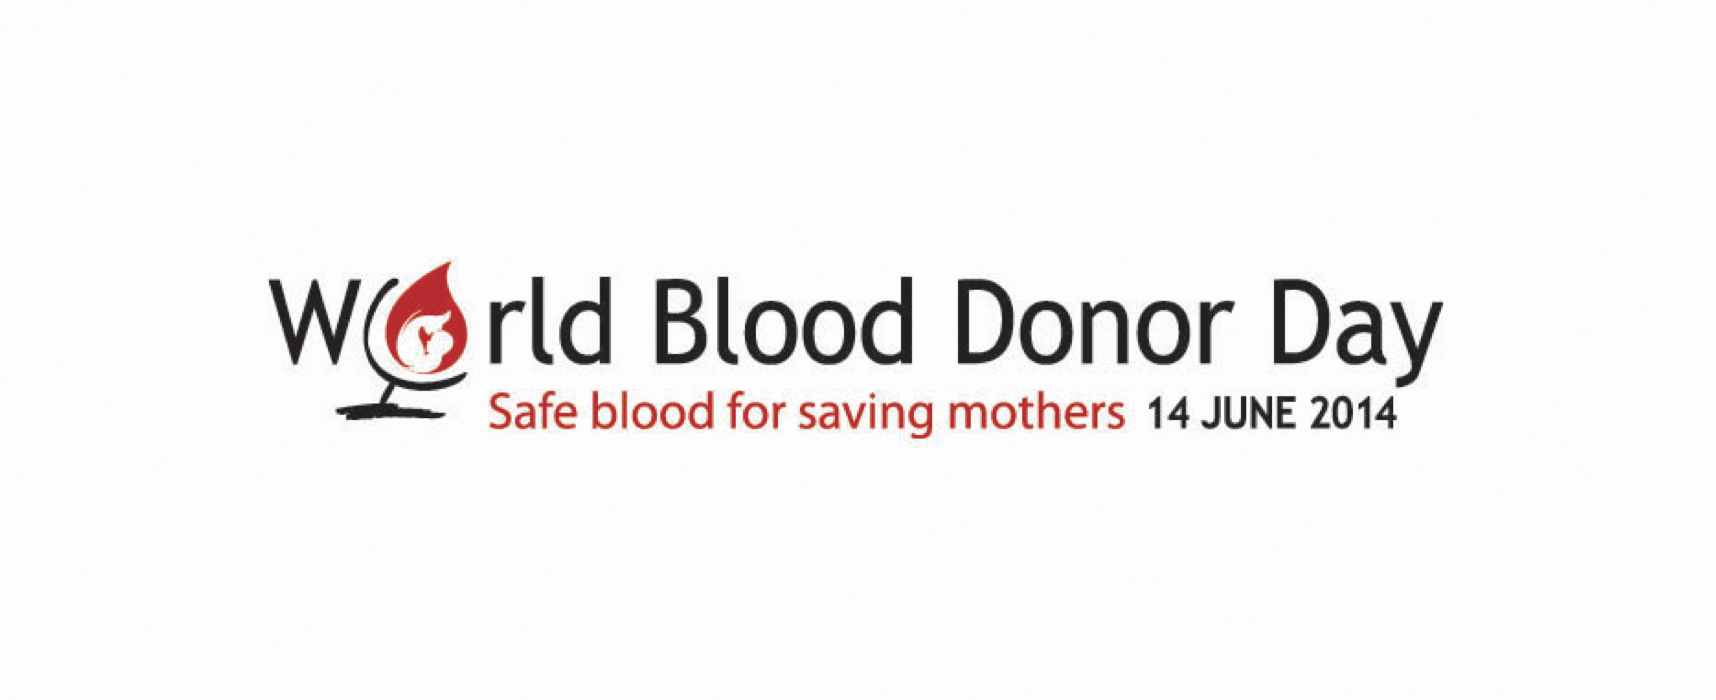 world blood donor day 